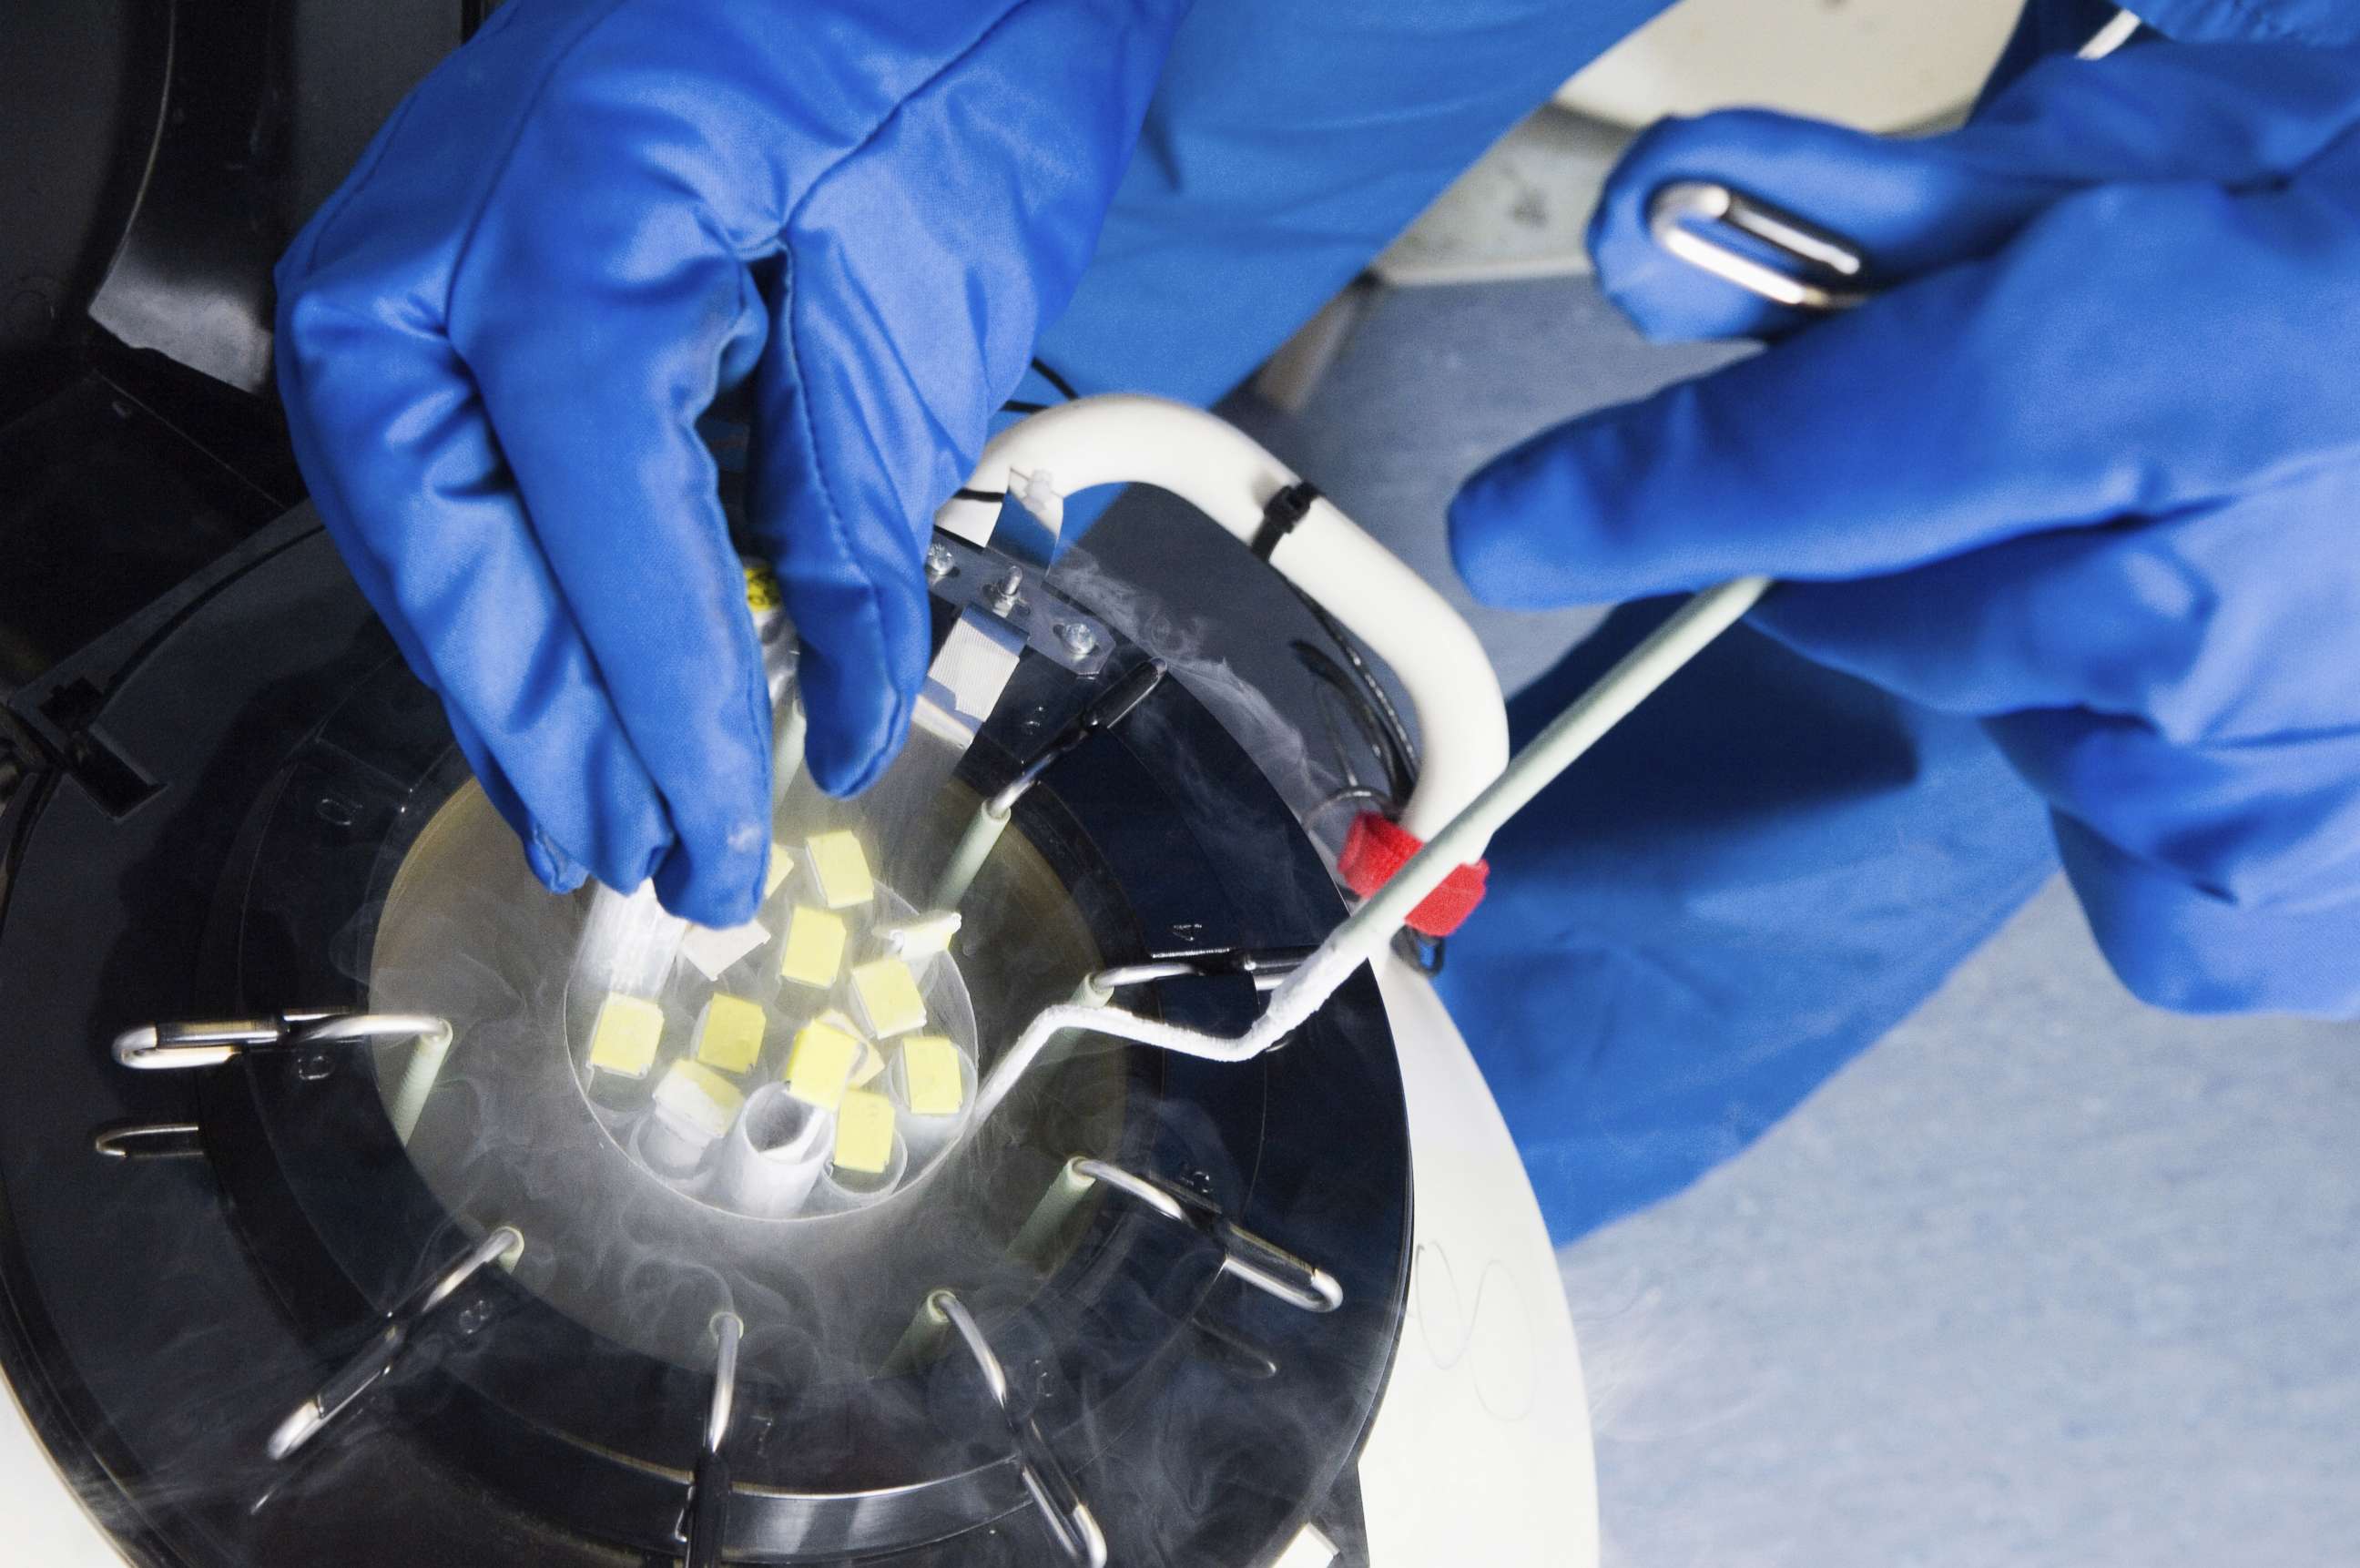 PHOTO: Doctors hands removing embryo samples from cryogenic storage, fertilized embryos are stored in liquid nitrogen filled tanks to keep them as new if patients require them at a later date.